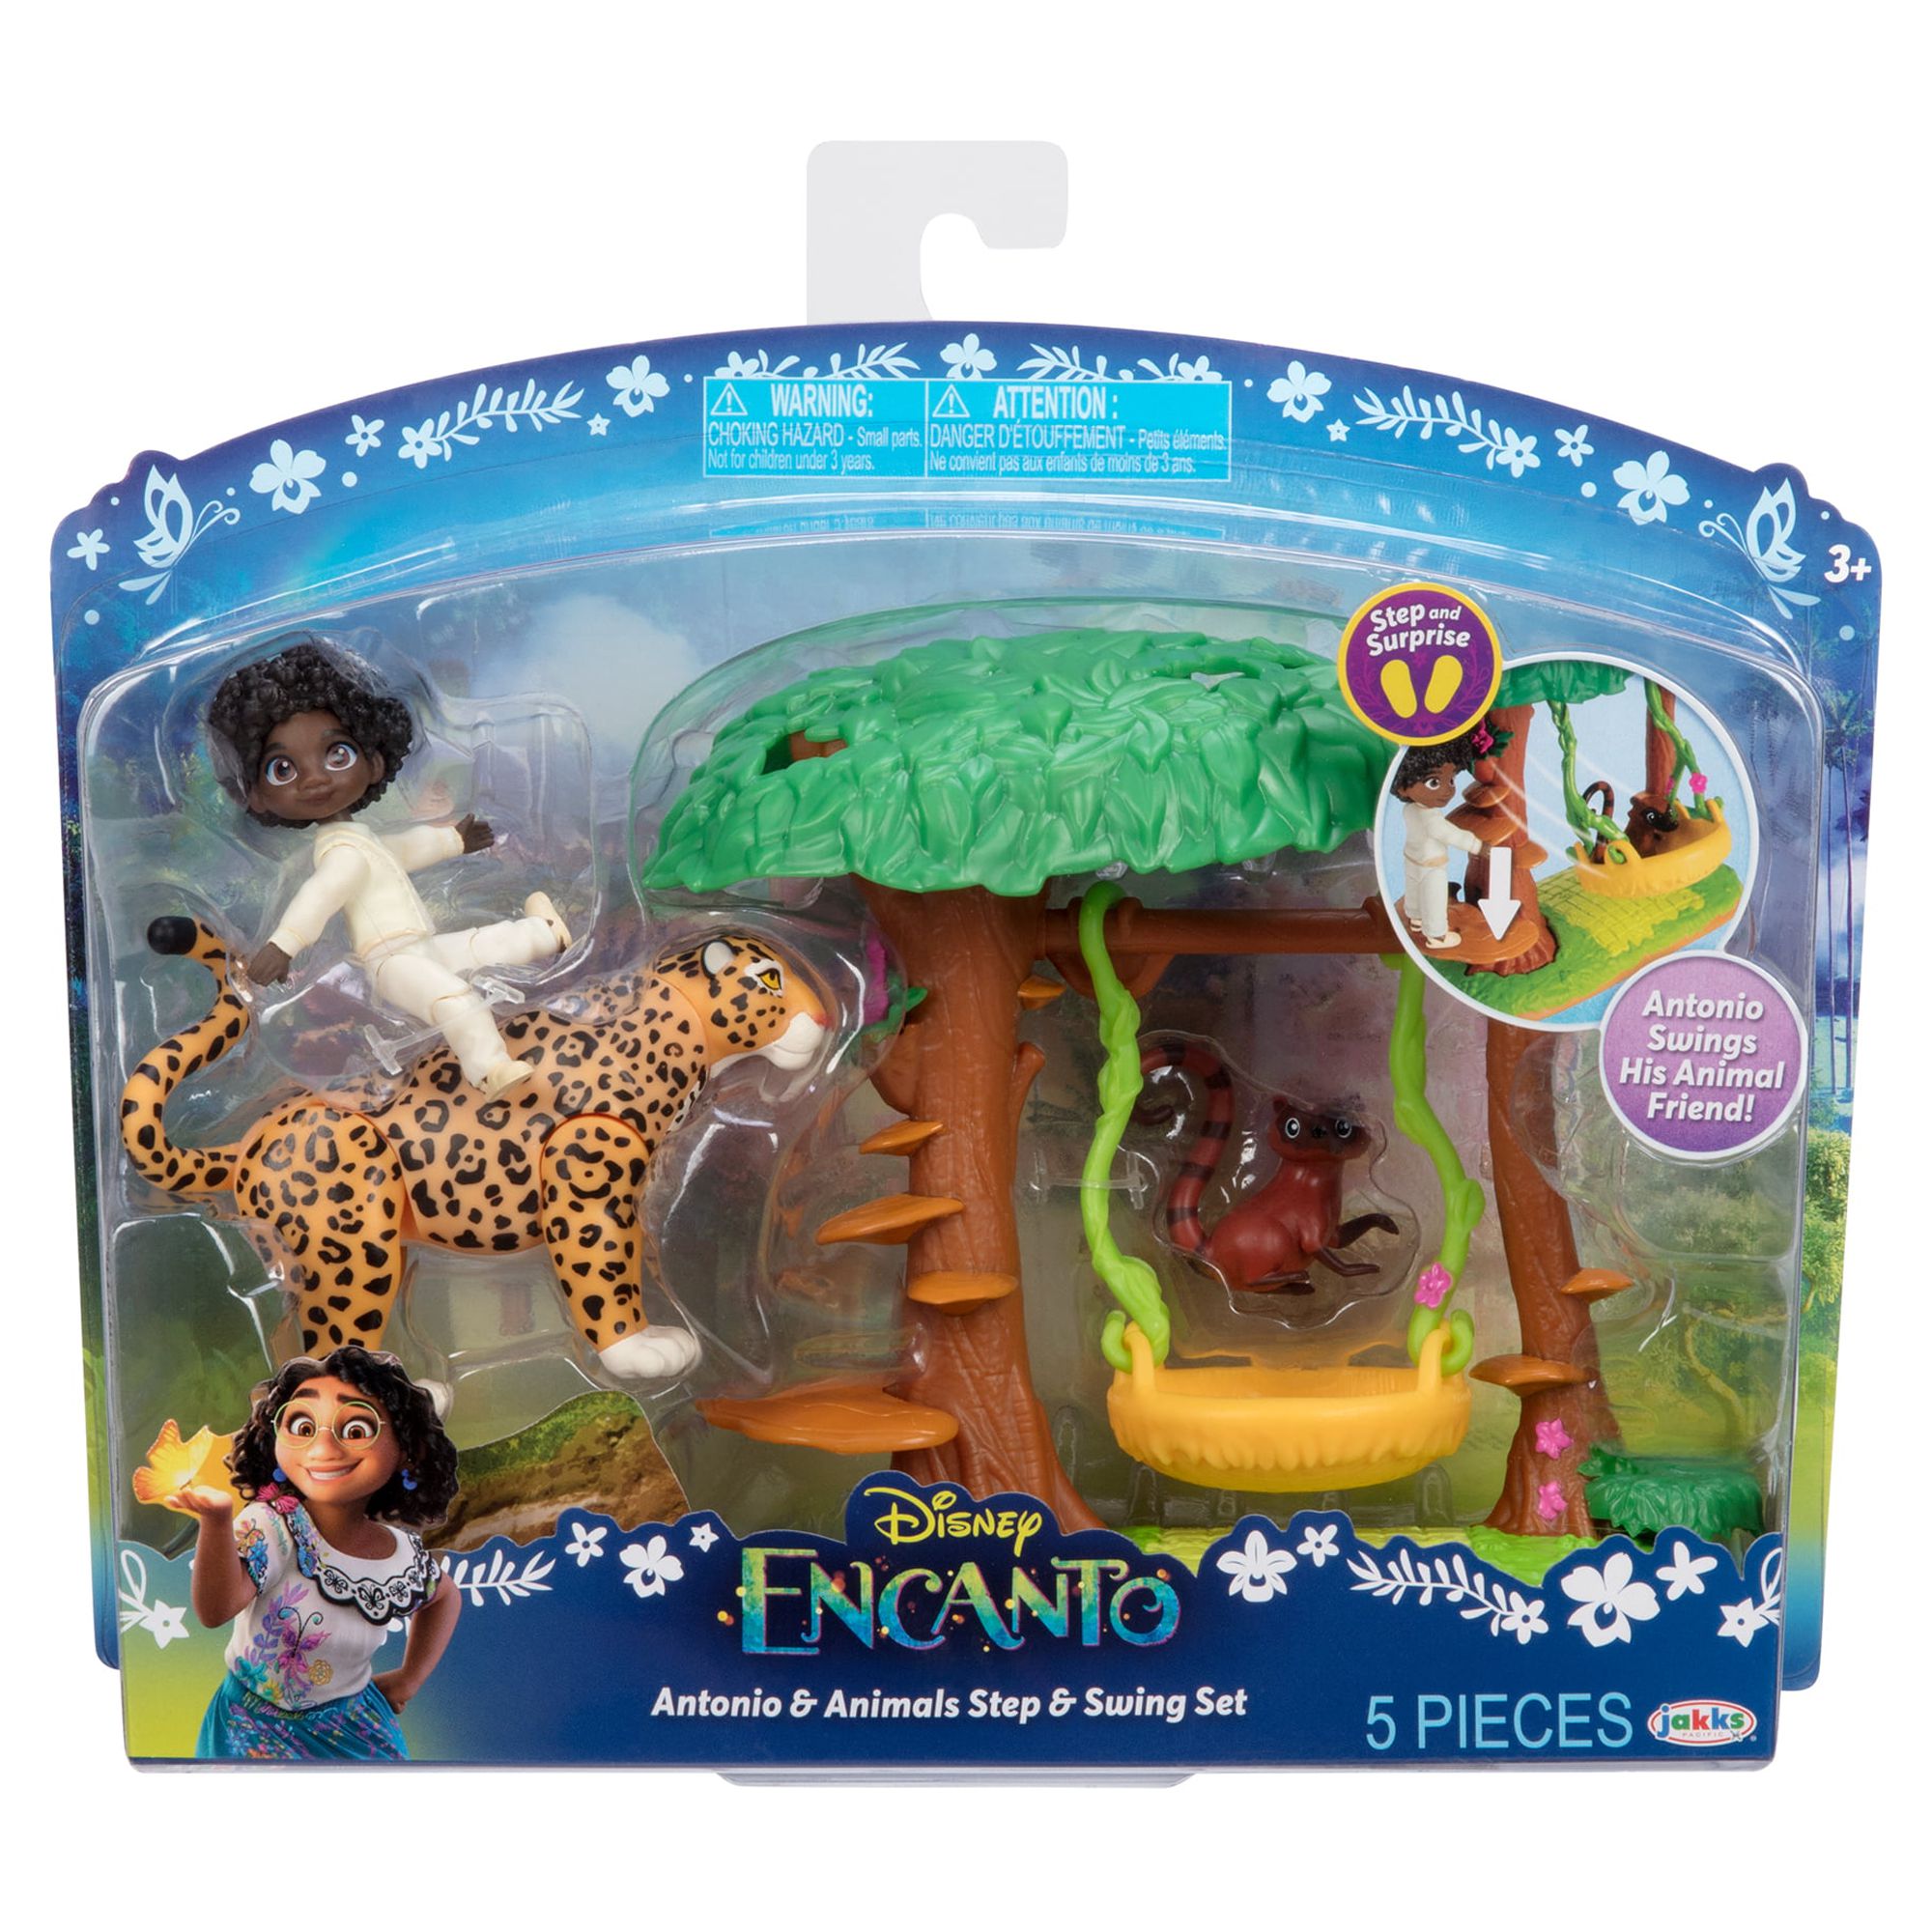 Disney Encanto Antonio's Step & Swing Small Doll Playset, Includes 3 Accessories, for Children Ages 3+ - image 5 of 5